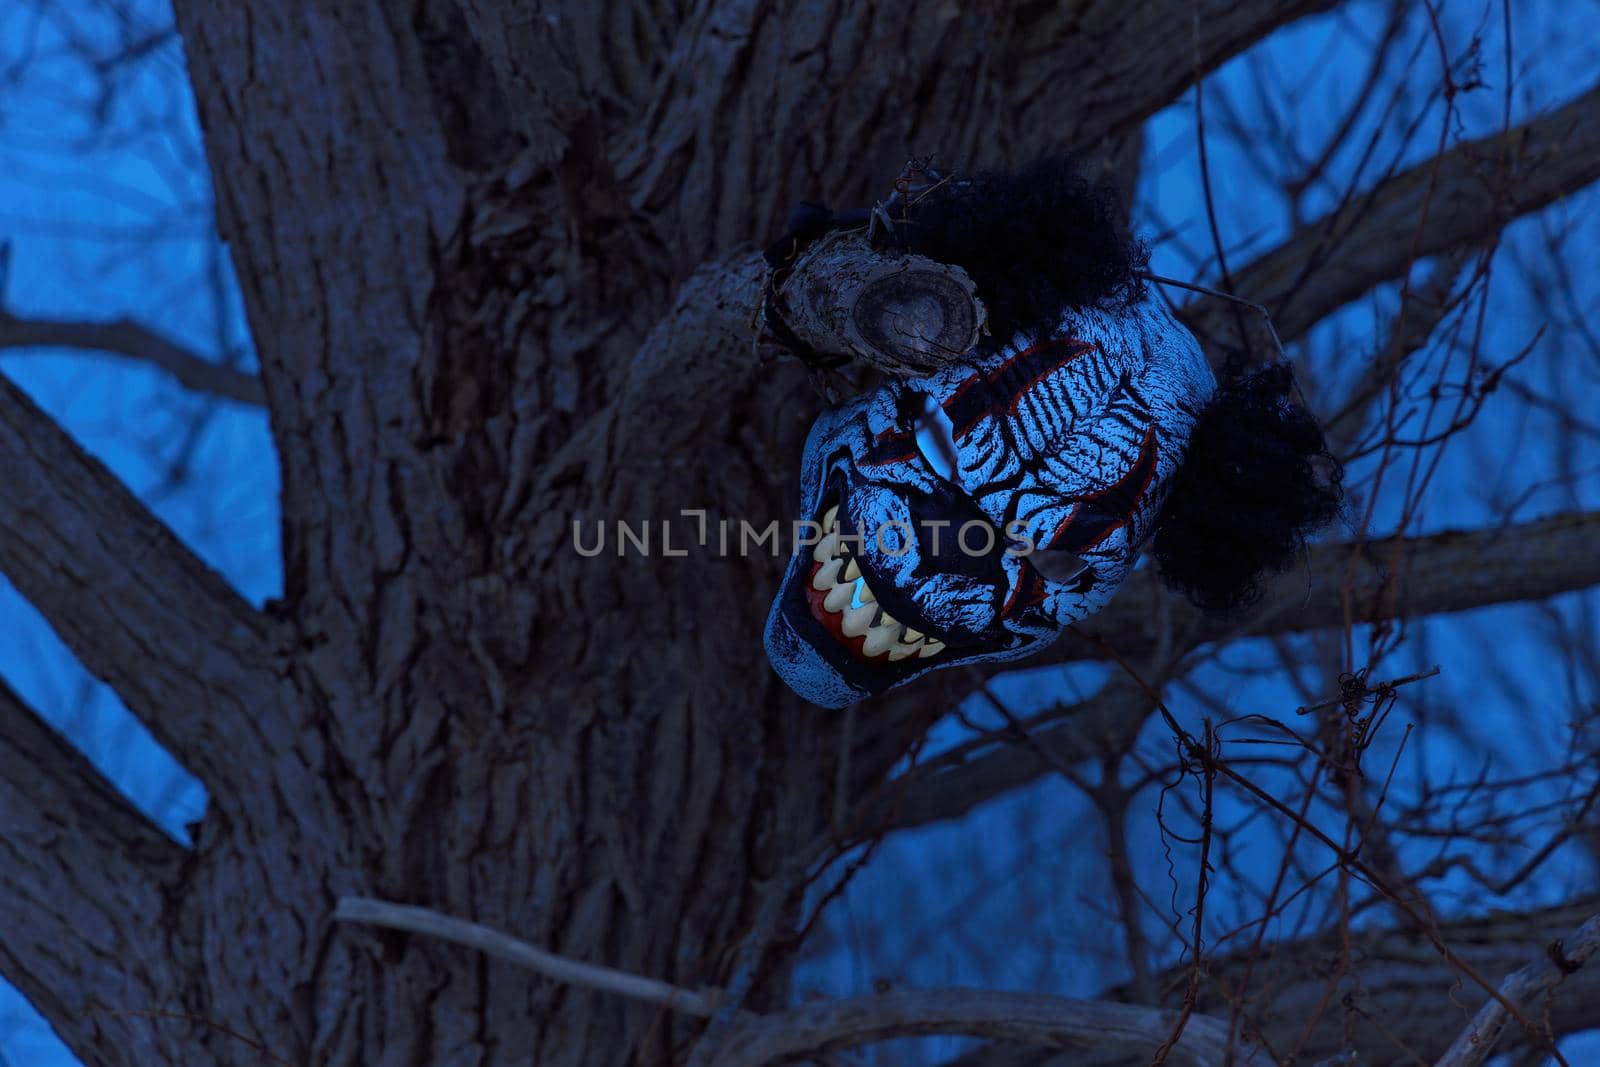 Terrifying Scary Clown Mask with Large Fangs in a Spooky Tree with at Twilight or Night. High quality photo